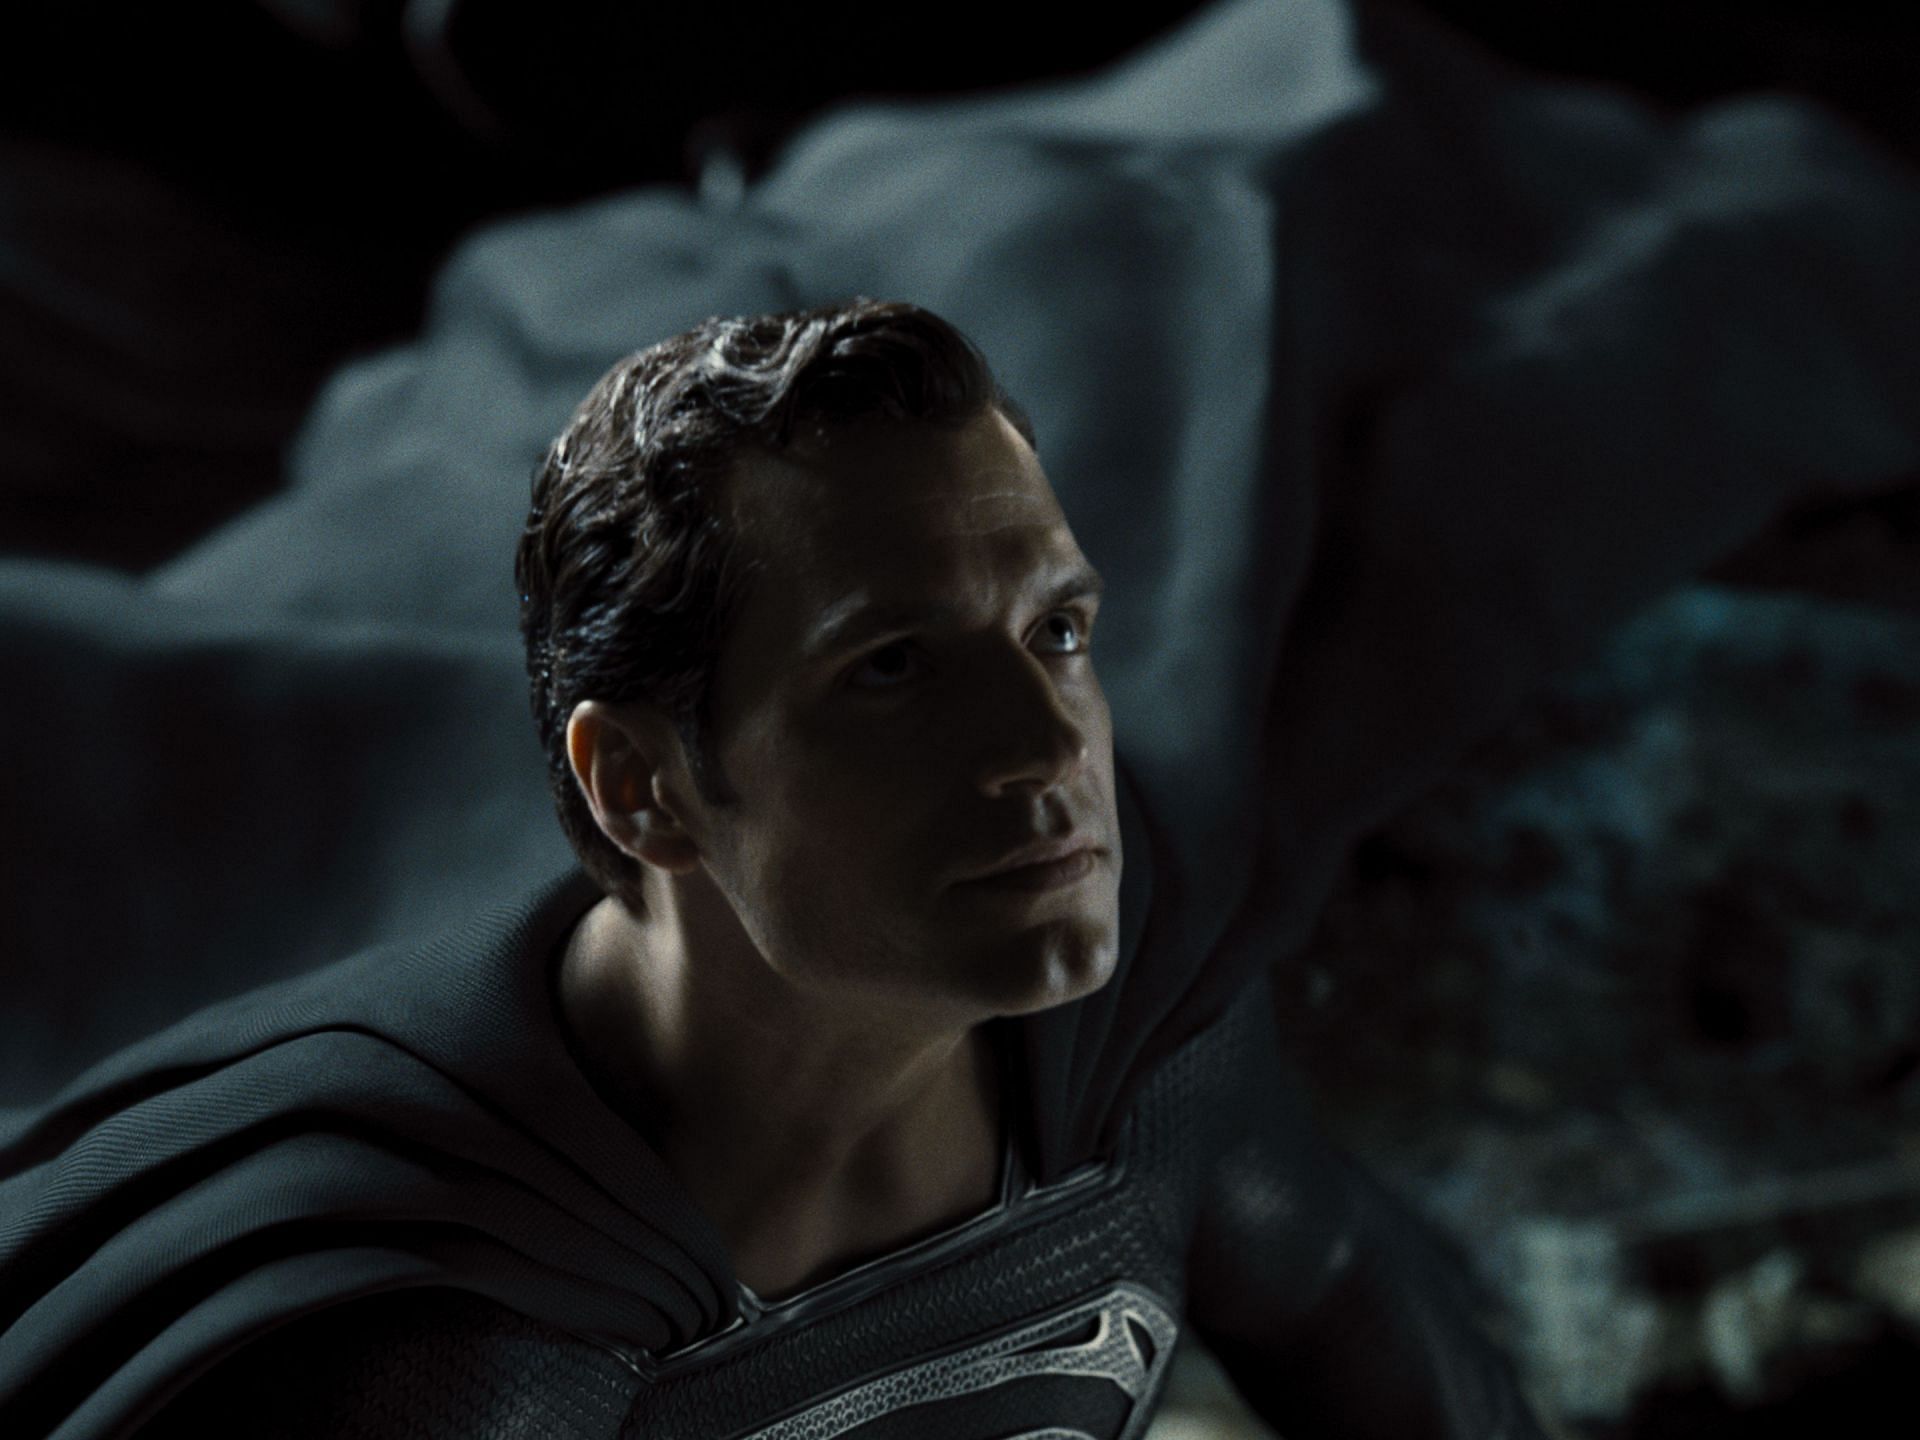 The Man of Steel is virtually invulnerable to all physical harm and possesses superhuman strength, speed, and heat vision (Image via DC Studios)